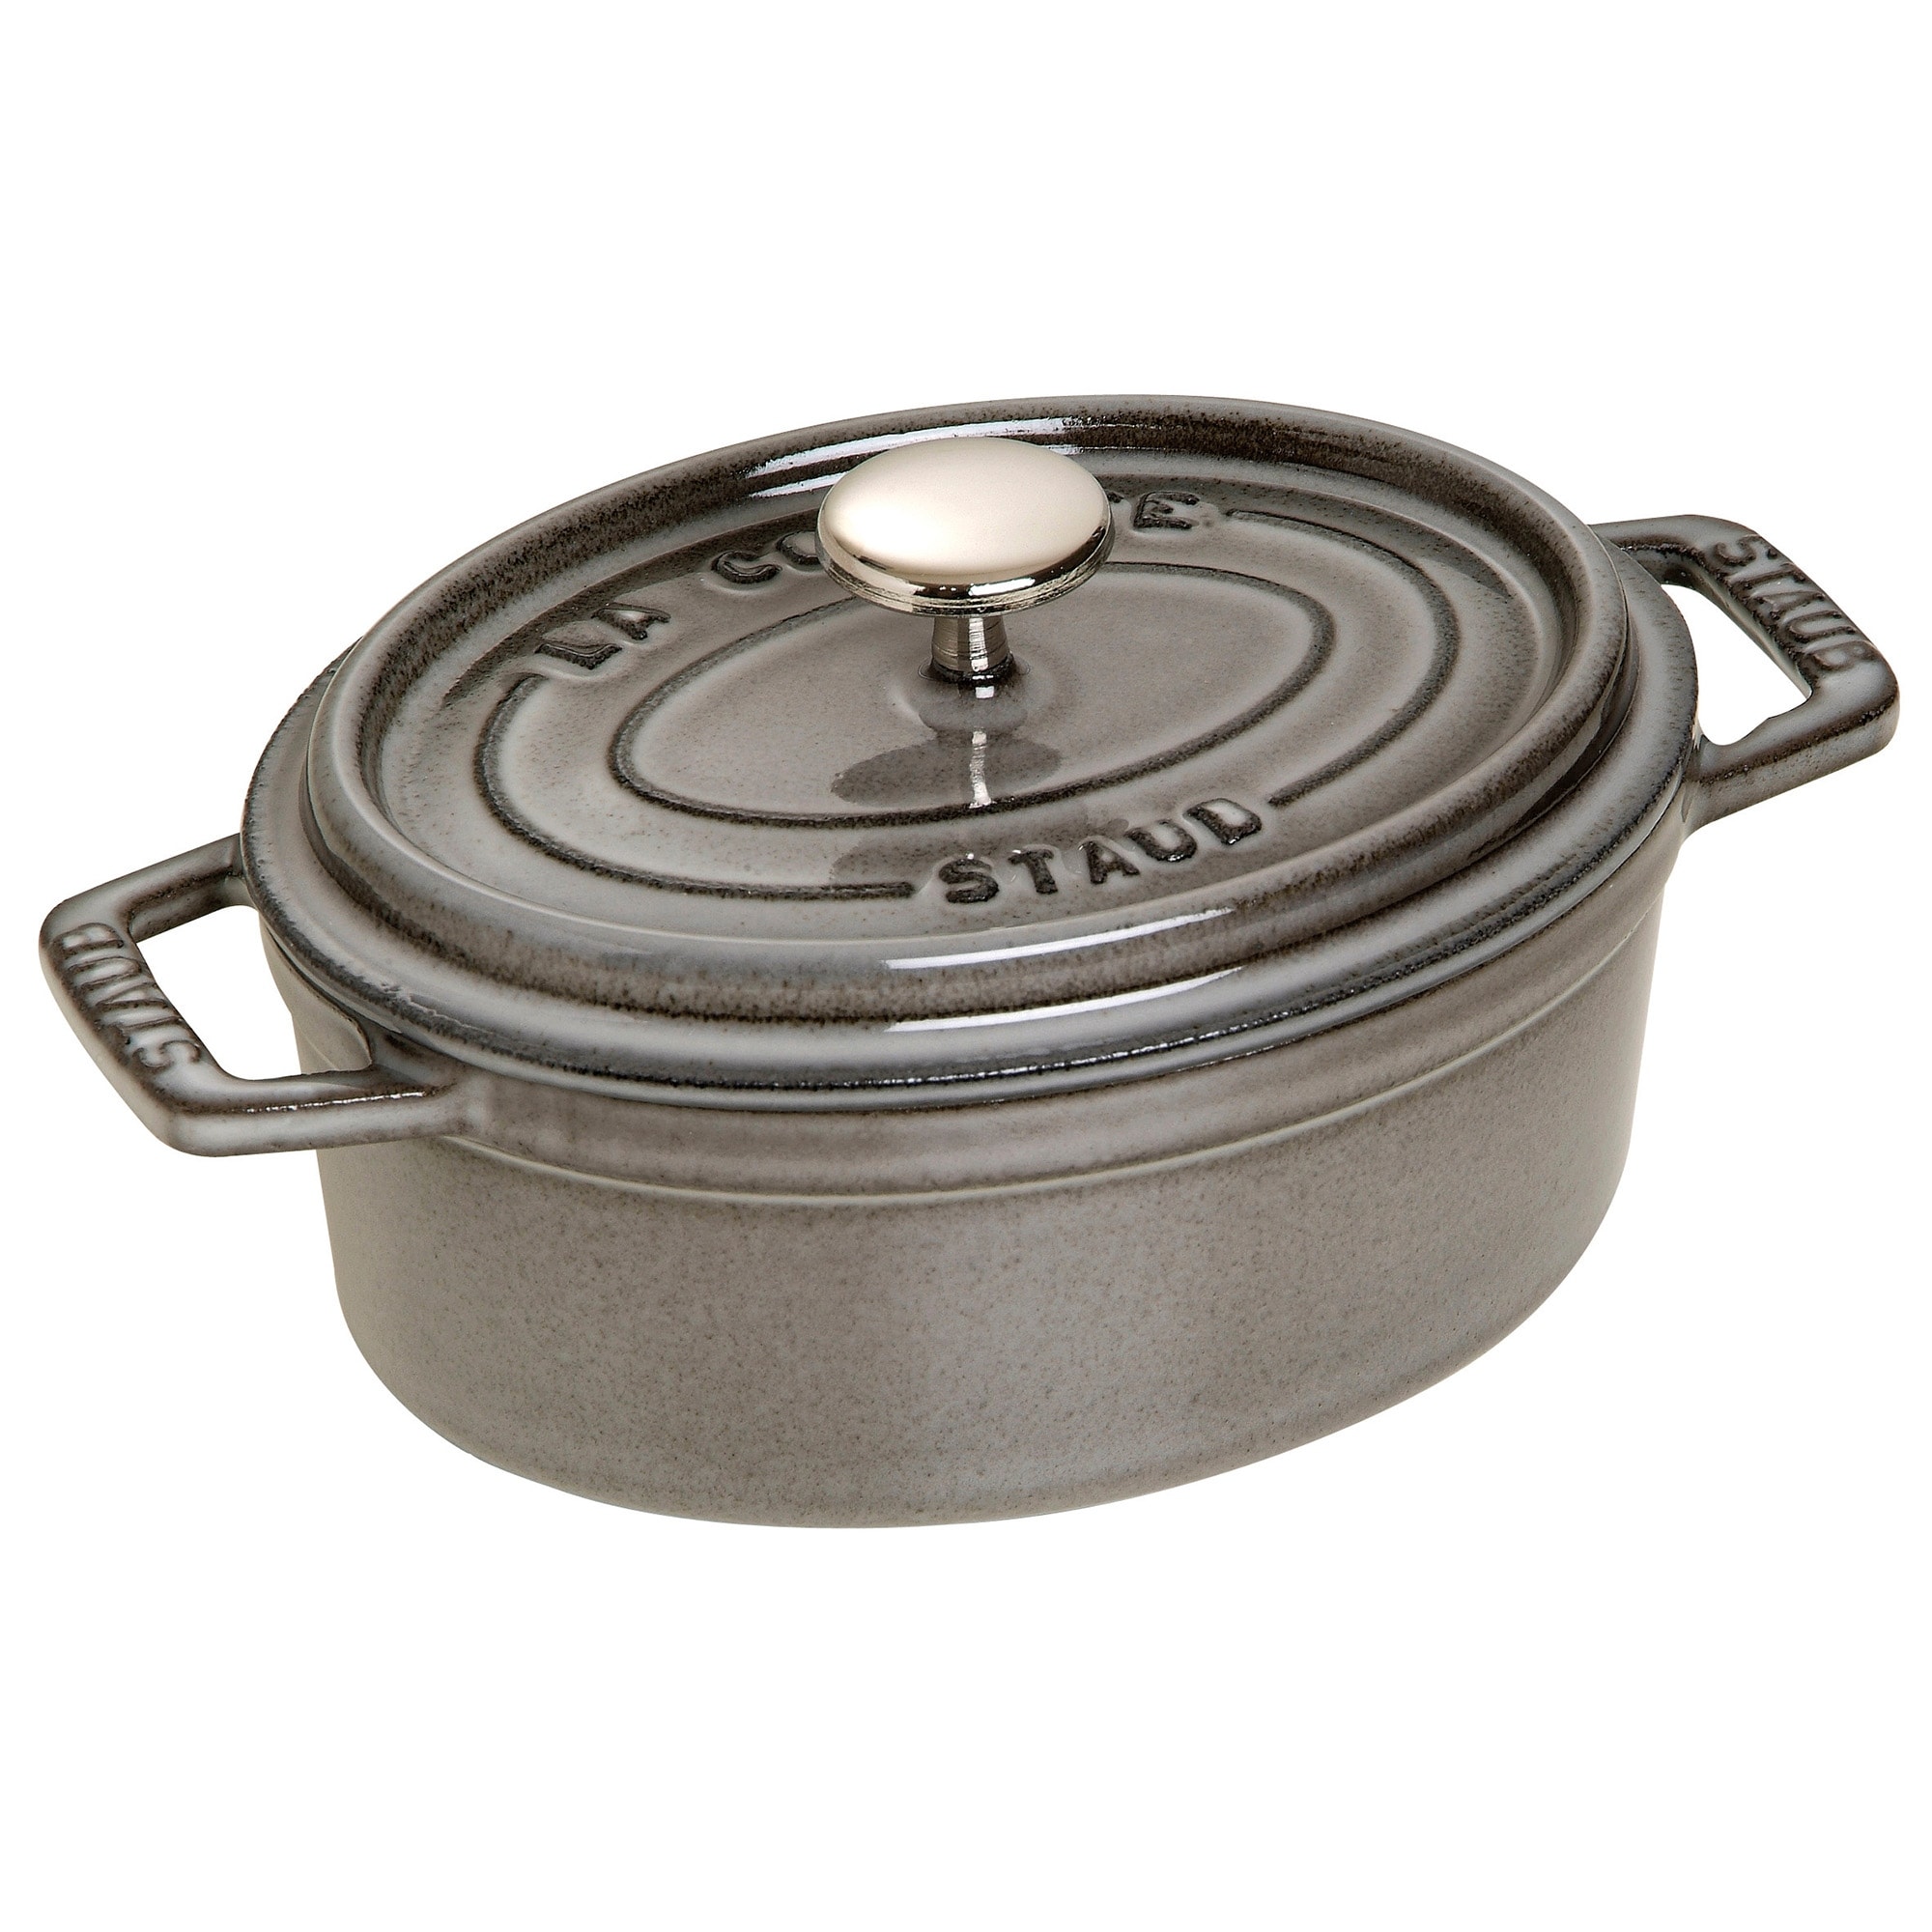 https://ak1.ostkcdn.com/images/products/is/images/direct/edb6a812321a38b76c5bfd646009e2b438fe5c09/STAUB-Cast-Iron-1-qt-Oval-Cocotte.jpg